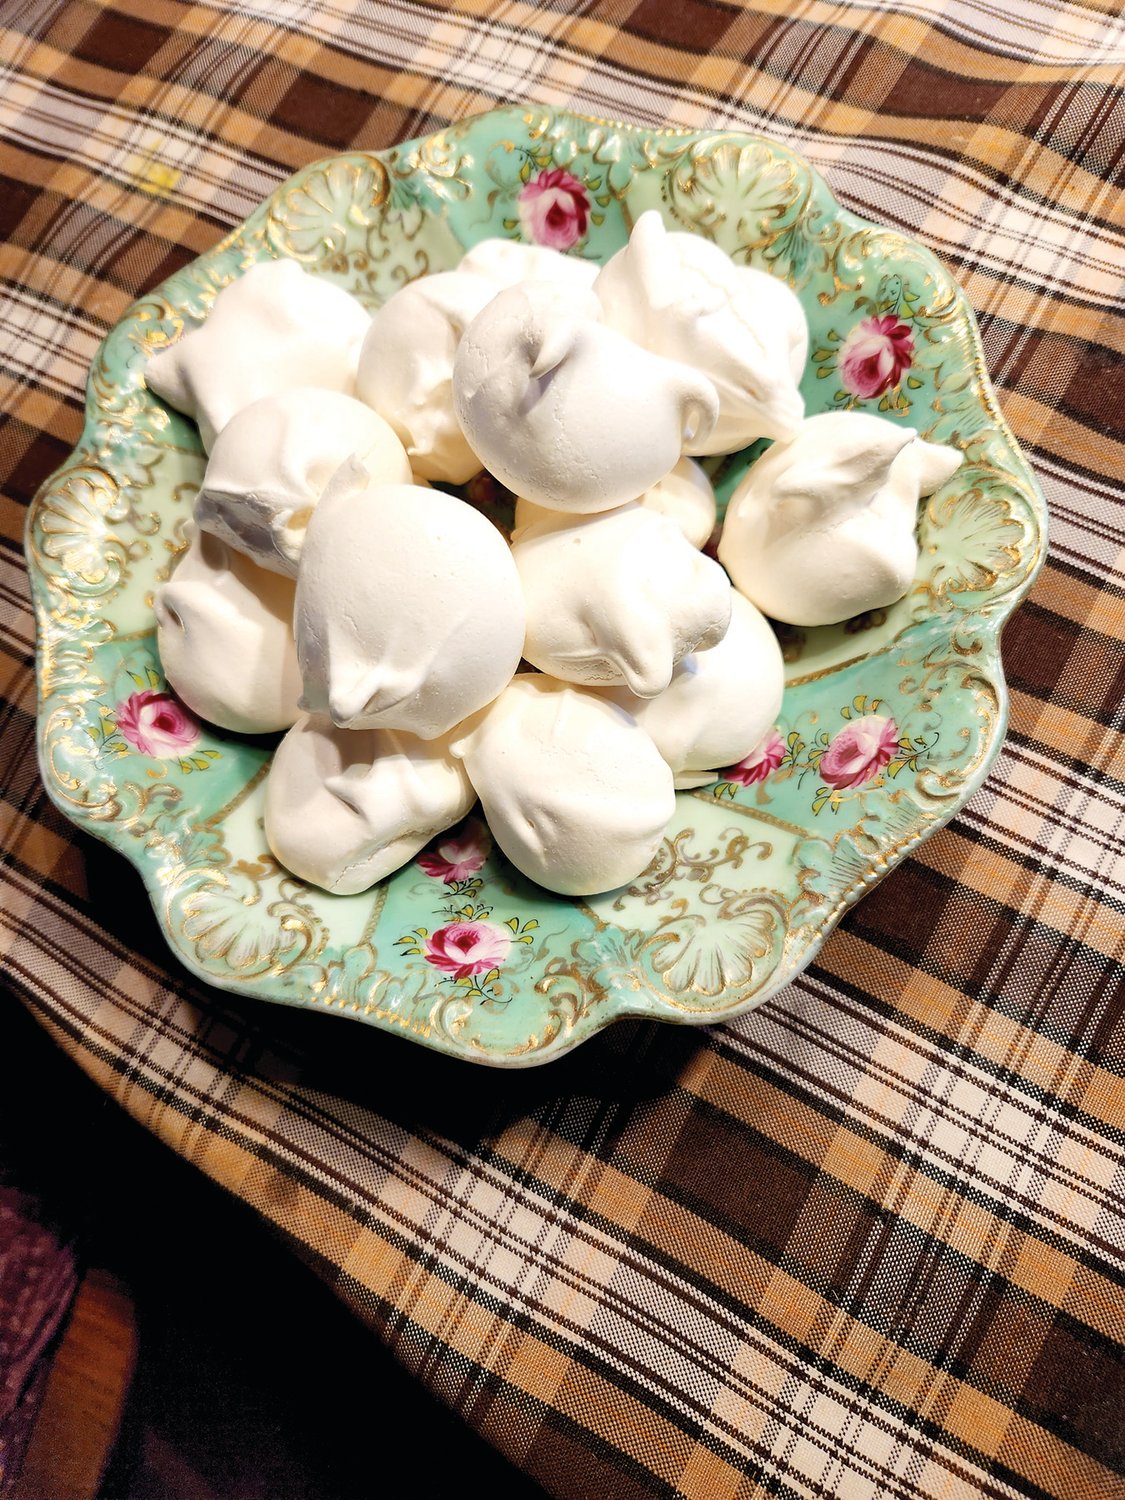 Meringues are a simple four-ingredient recipe made up mostly of egg whites, sugar and air. They are great for anyone avoiding gluten, those who are counting calories, and anyone who likes something light and sweet.